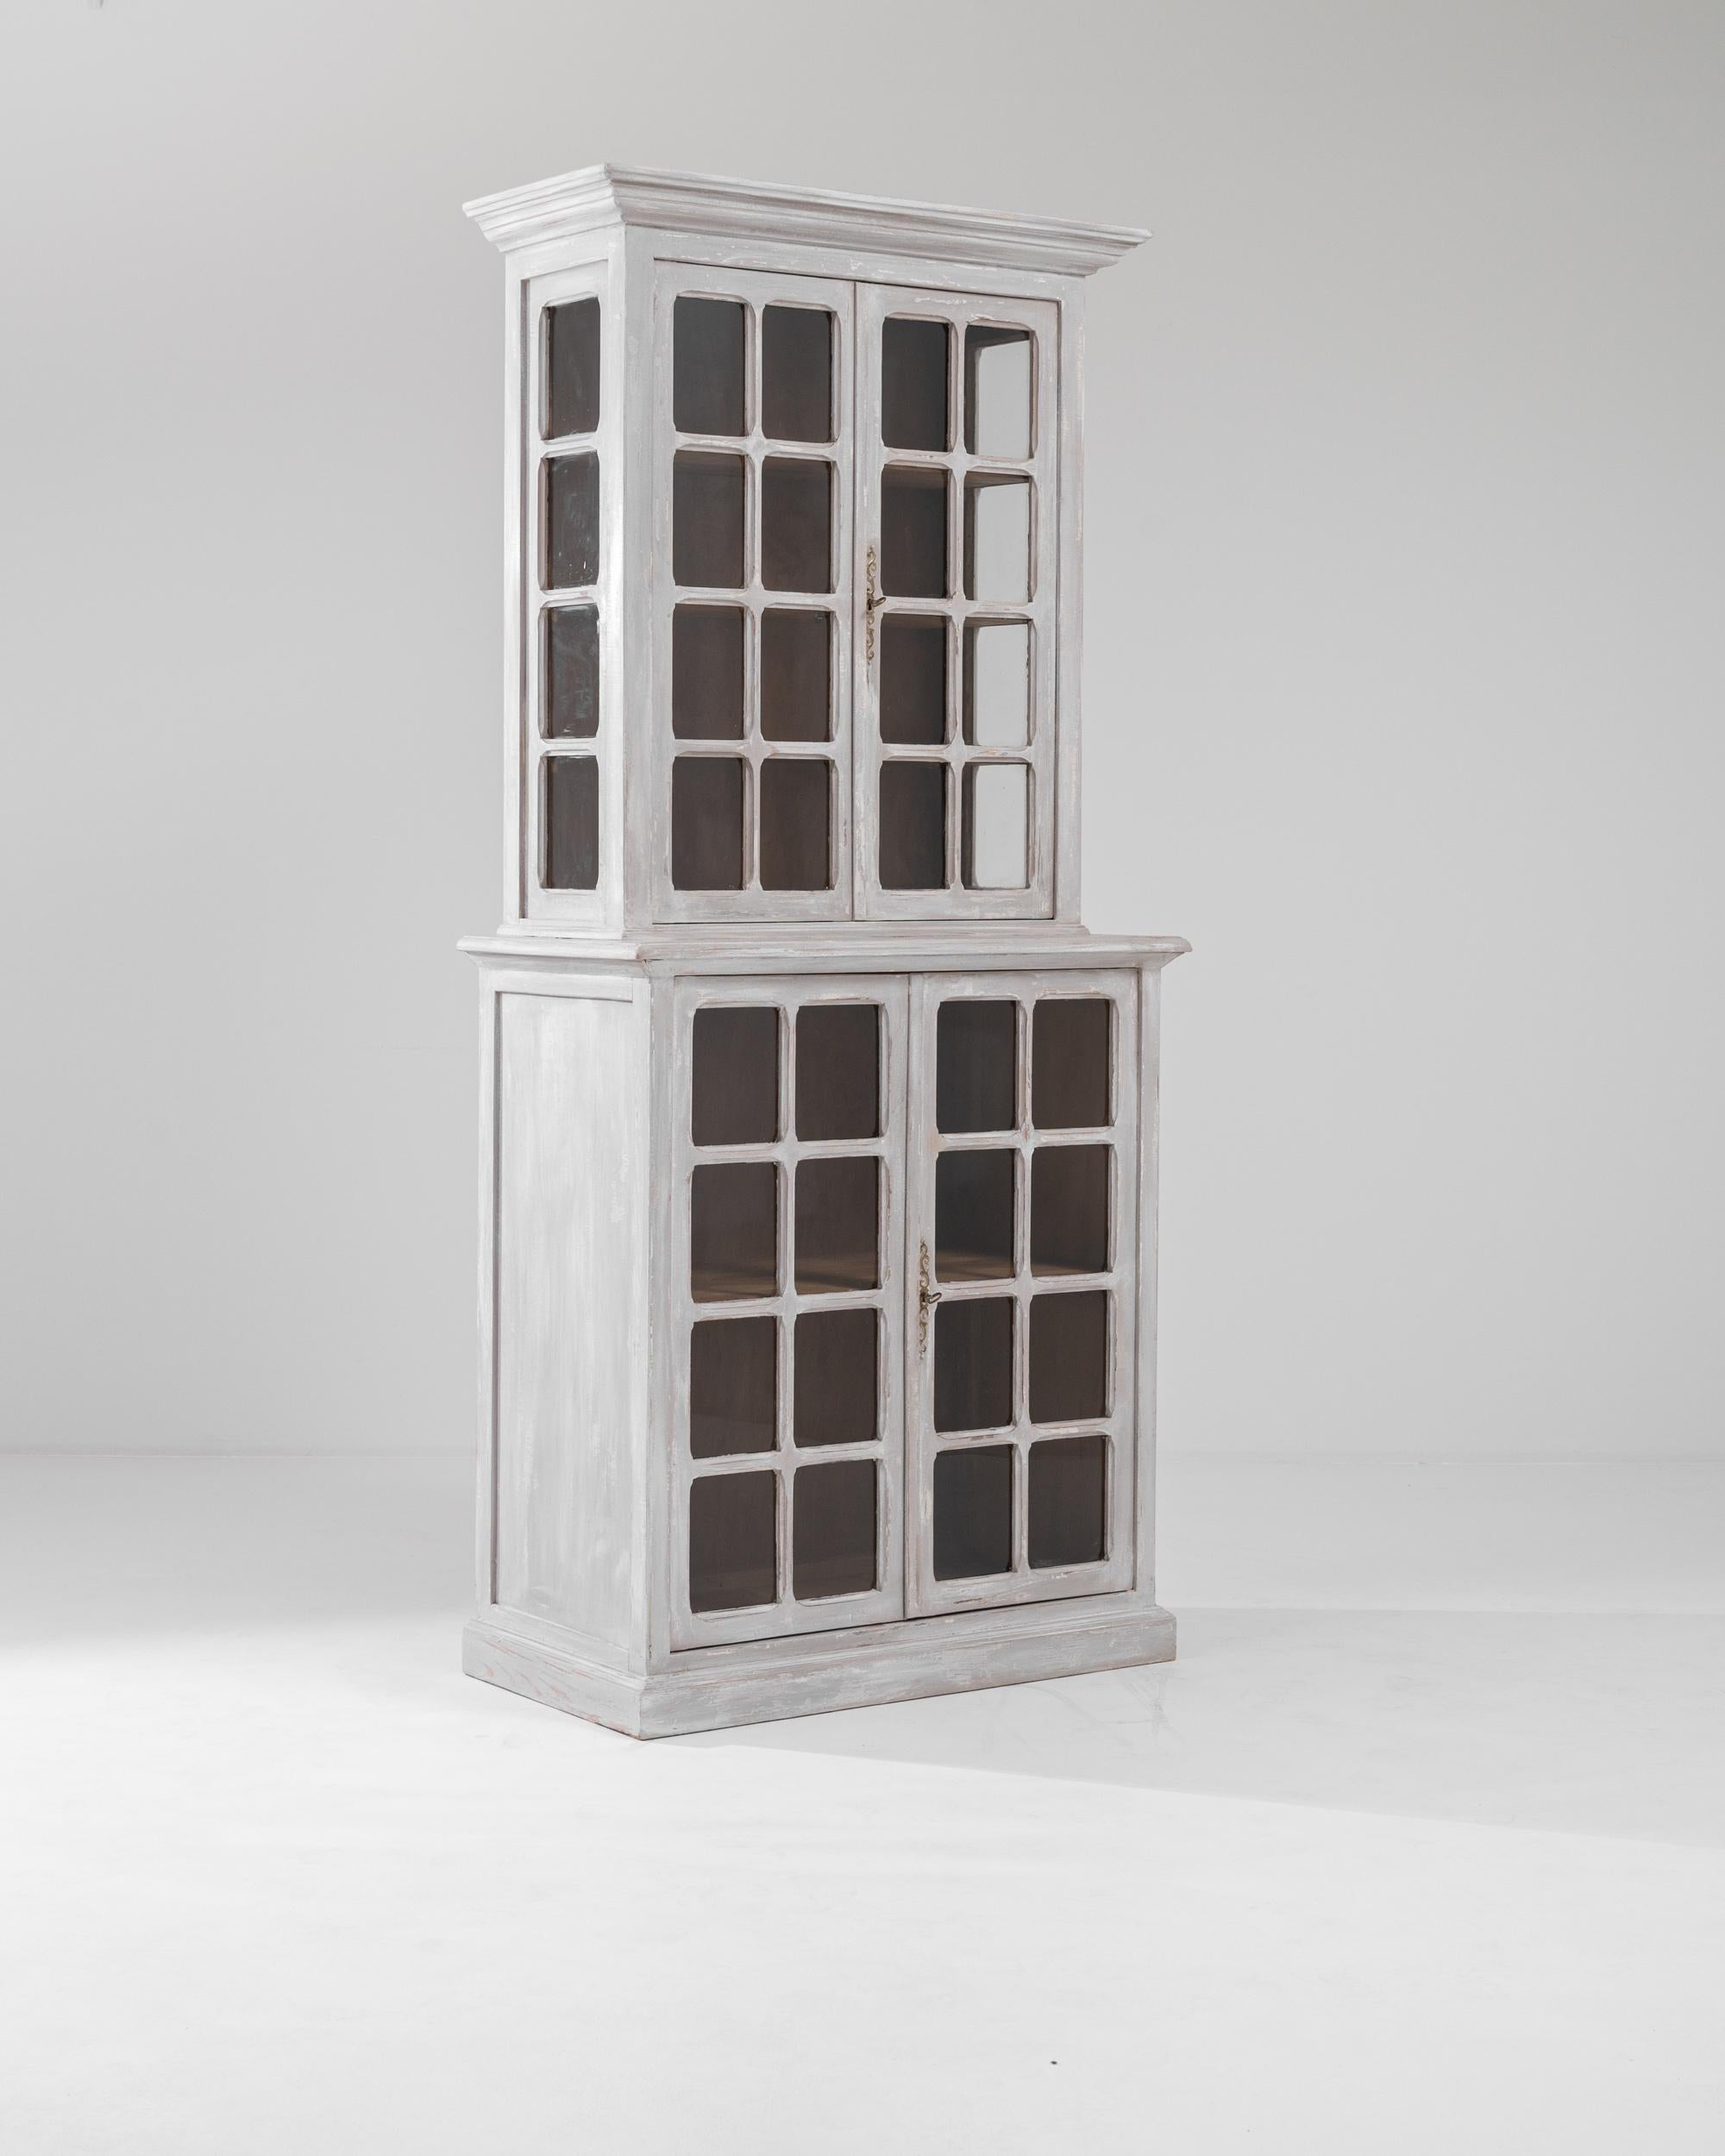 This wooden patinated vitrine was produced in France during the turn of the century. Featuring a double-case with glass doors, this tall vitrine features cornice beveled crown moldings, gilded scrolled escutcheons and a pearl gray distressed finish